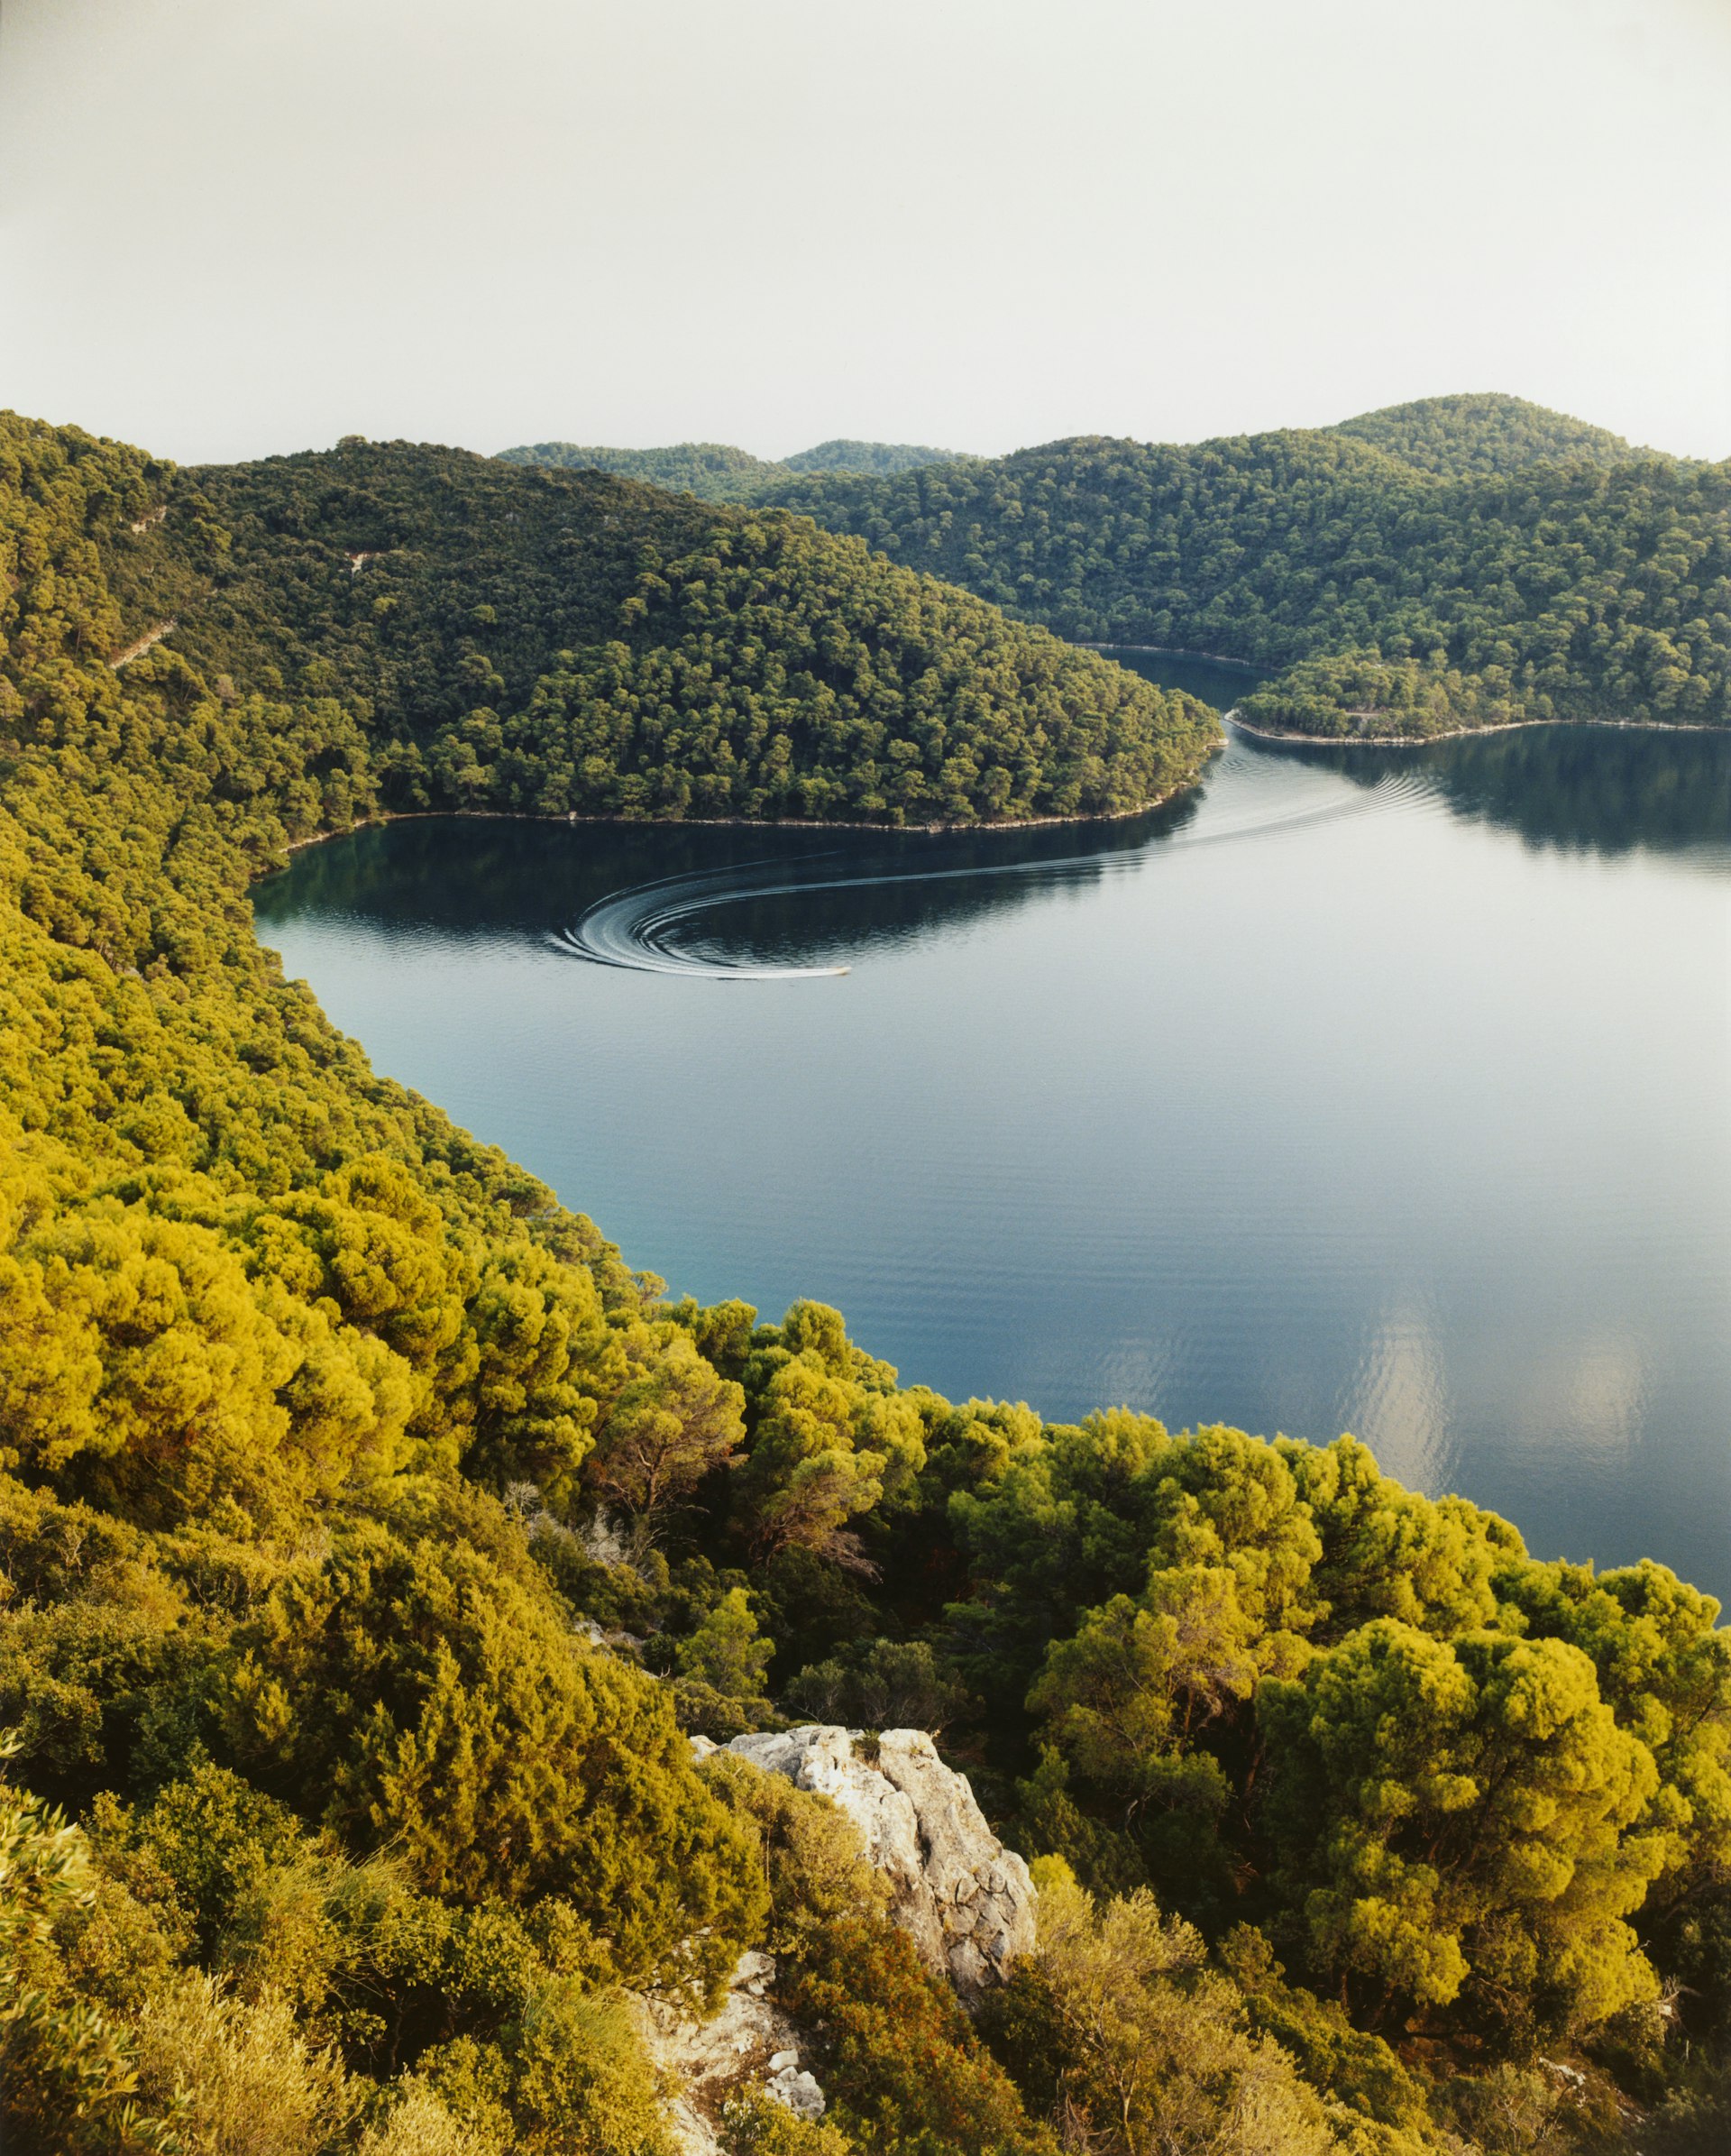 The light shines over the trees and water of Veliko Lake in Mljet. 